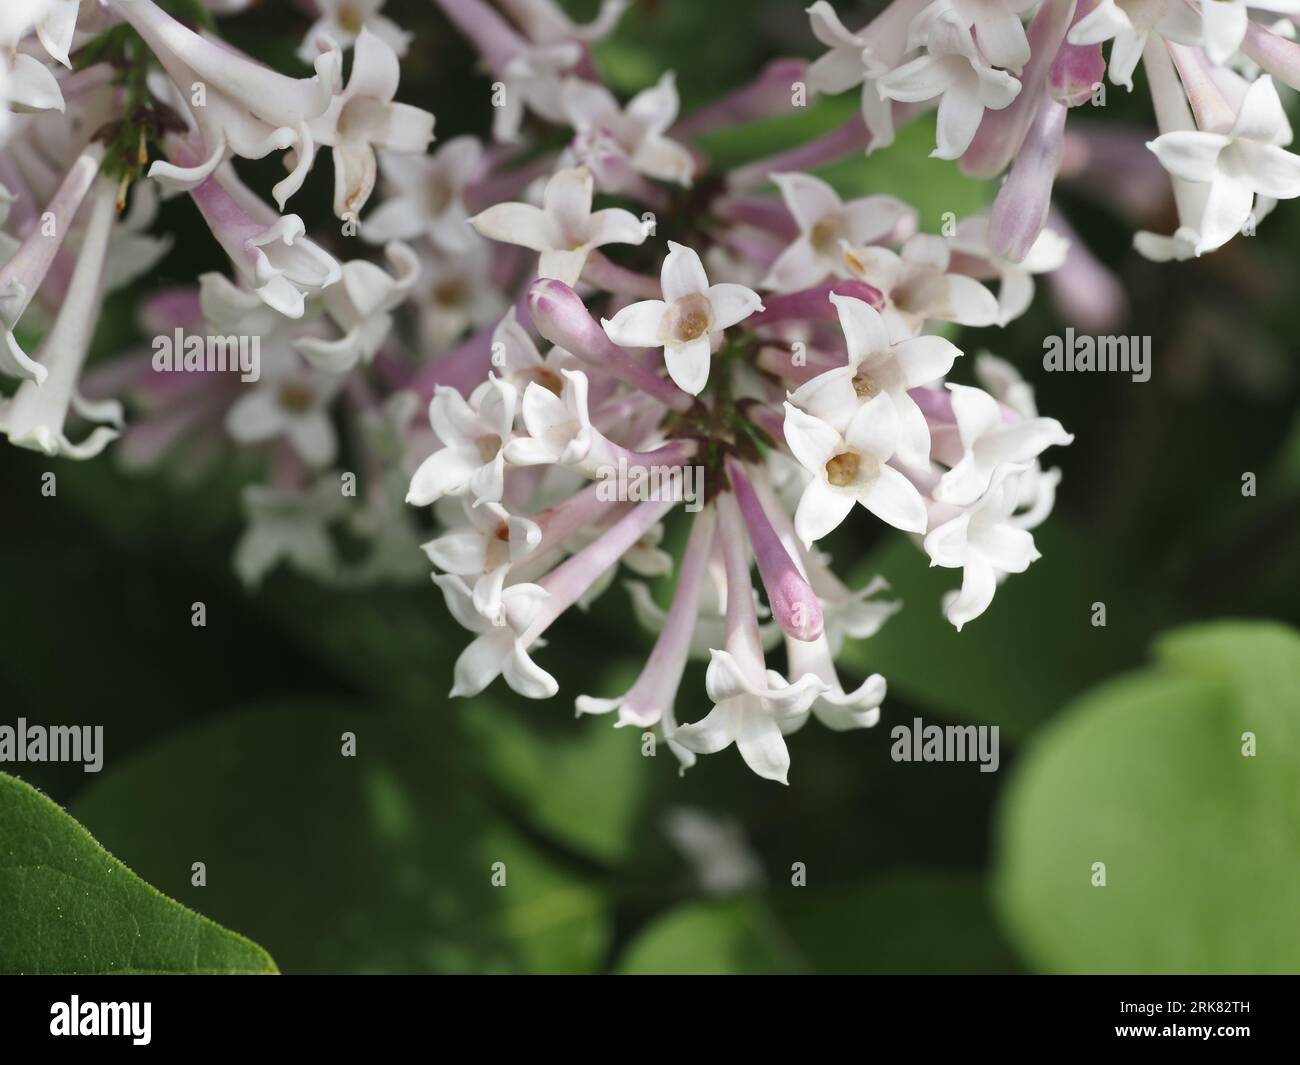 Miss Kim Lilac blossoms in late spring. Scientific name: Syringa pubescens. Family: Oleaceae. Order: Lamiales. Kingdom: Plantae. Stock Photo